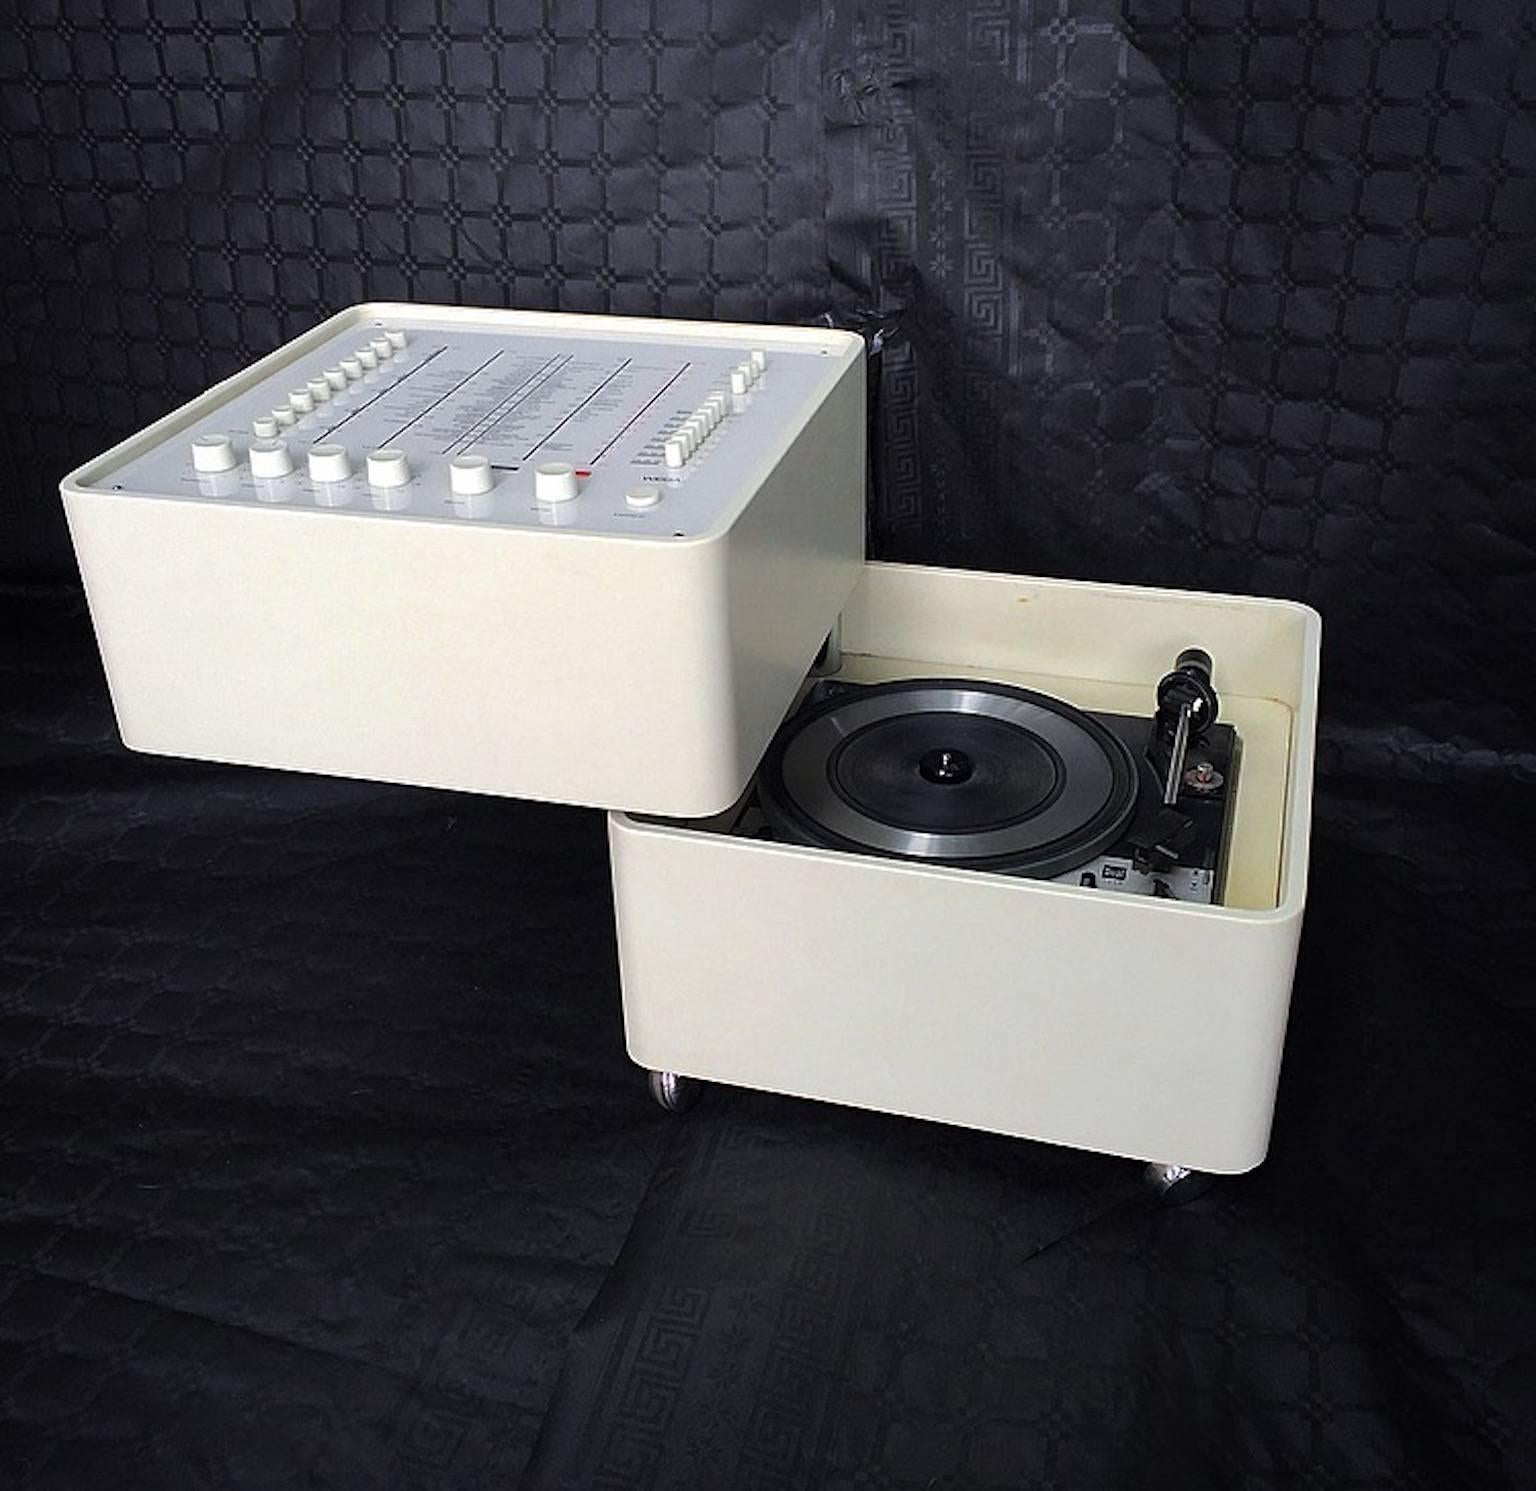 An astonish Midcentury hi-fi system The “Wega 3300” which is a remarkable example of Minimalist Industrial and product design of 20th century by Space Age designer Verner Panton.

This soundsystem is a square box with rounded corners and consists